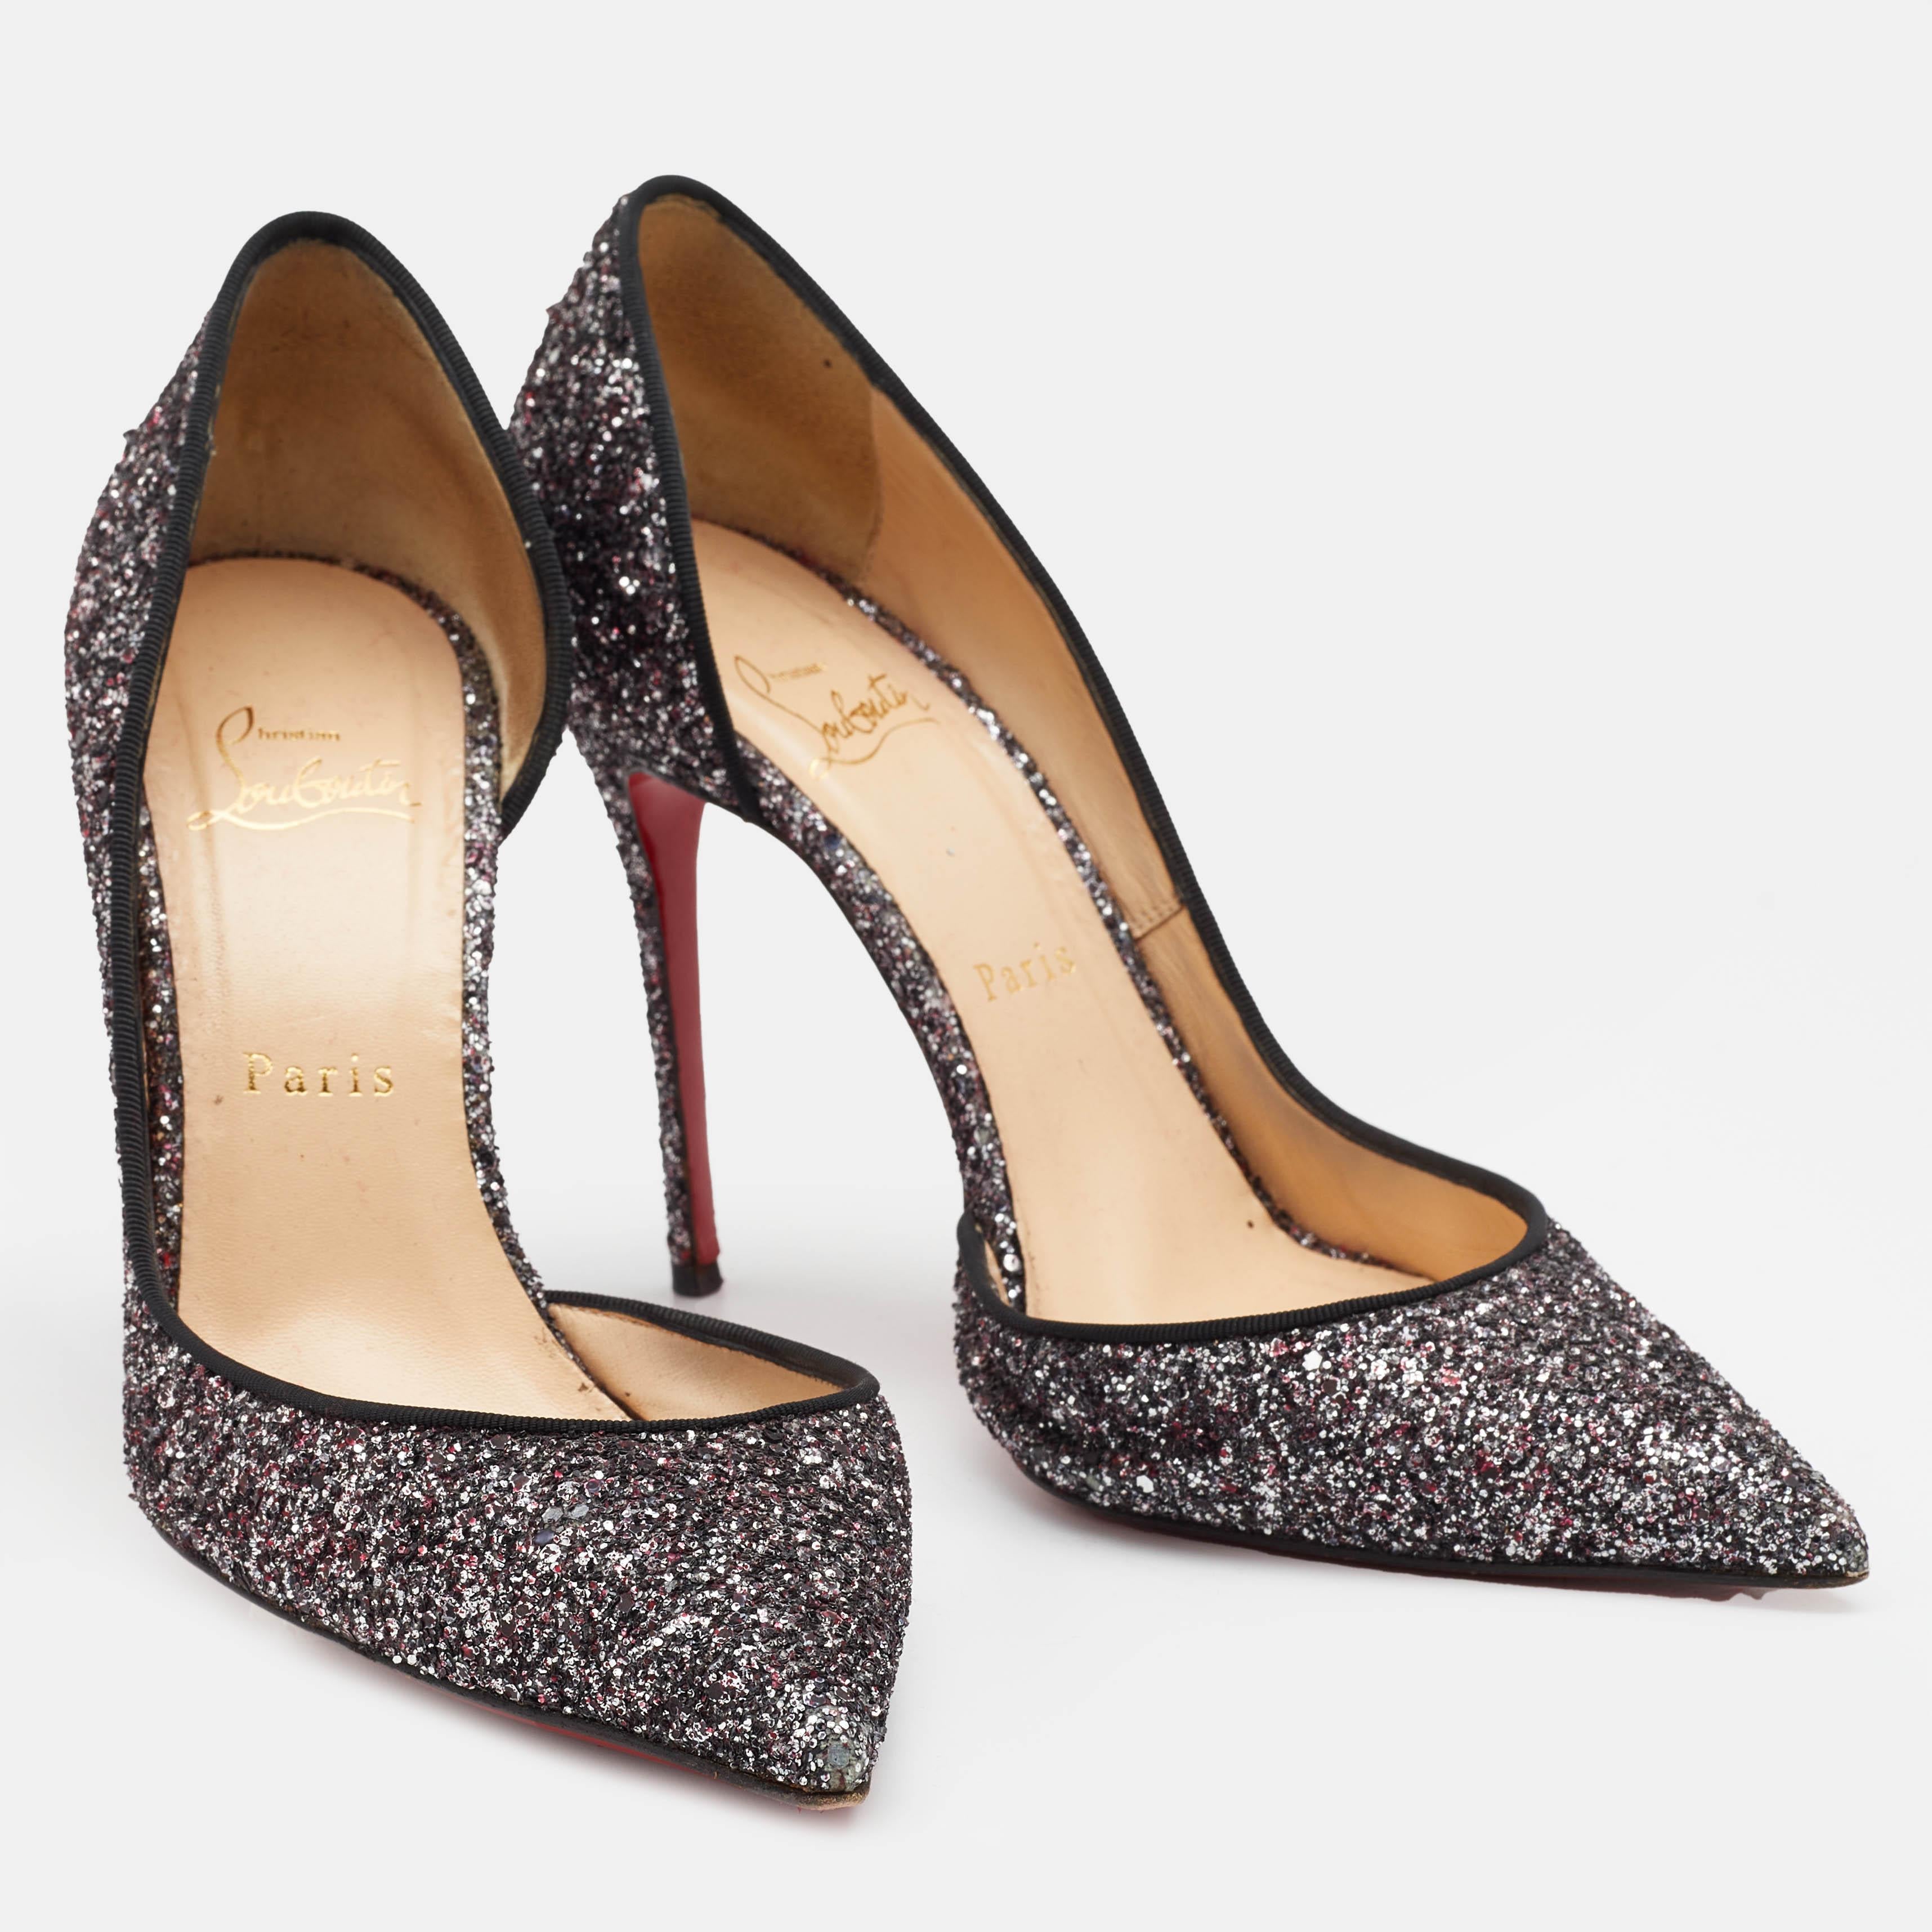 Christian Louboutin Black Glitter Iriza Pointed Toe D'orsay Pumps Size 39.5 For Sale 1